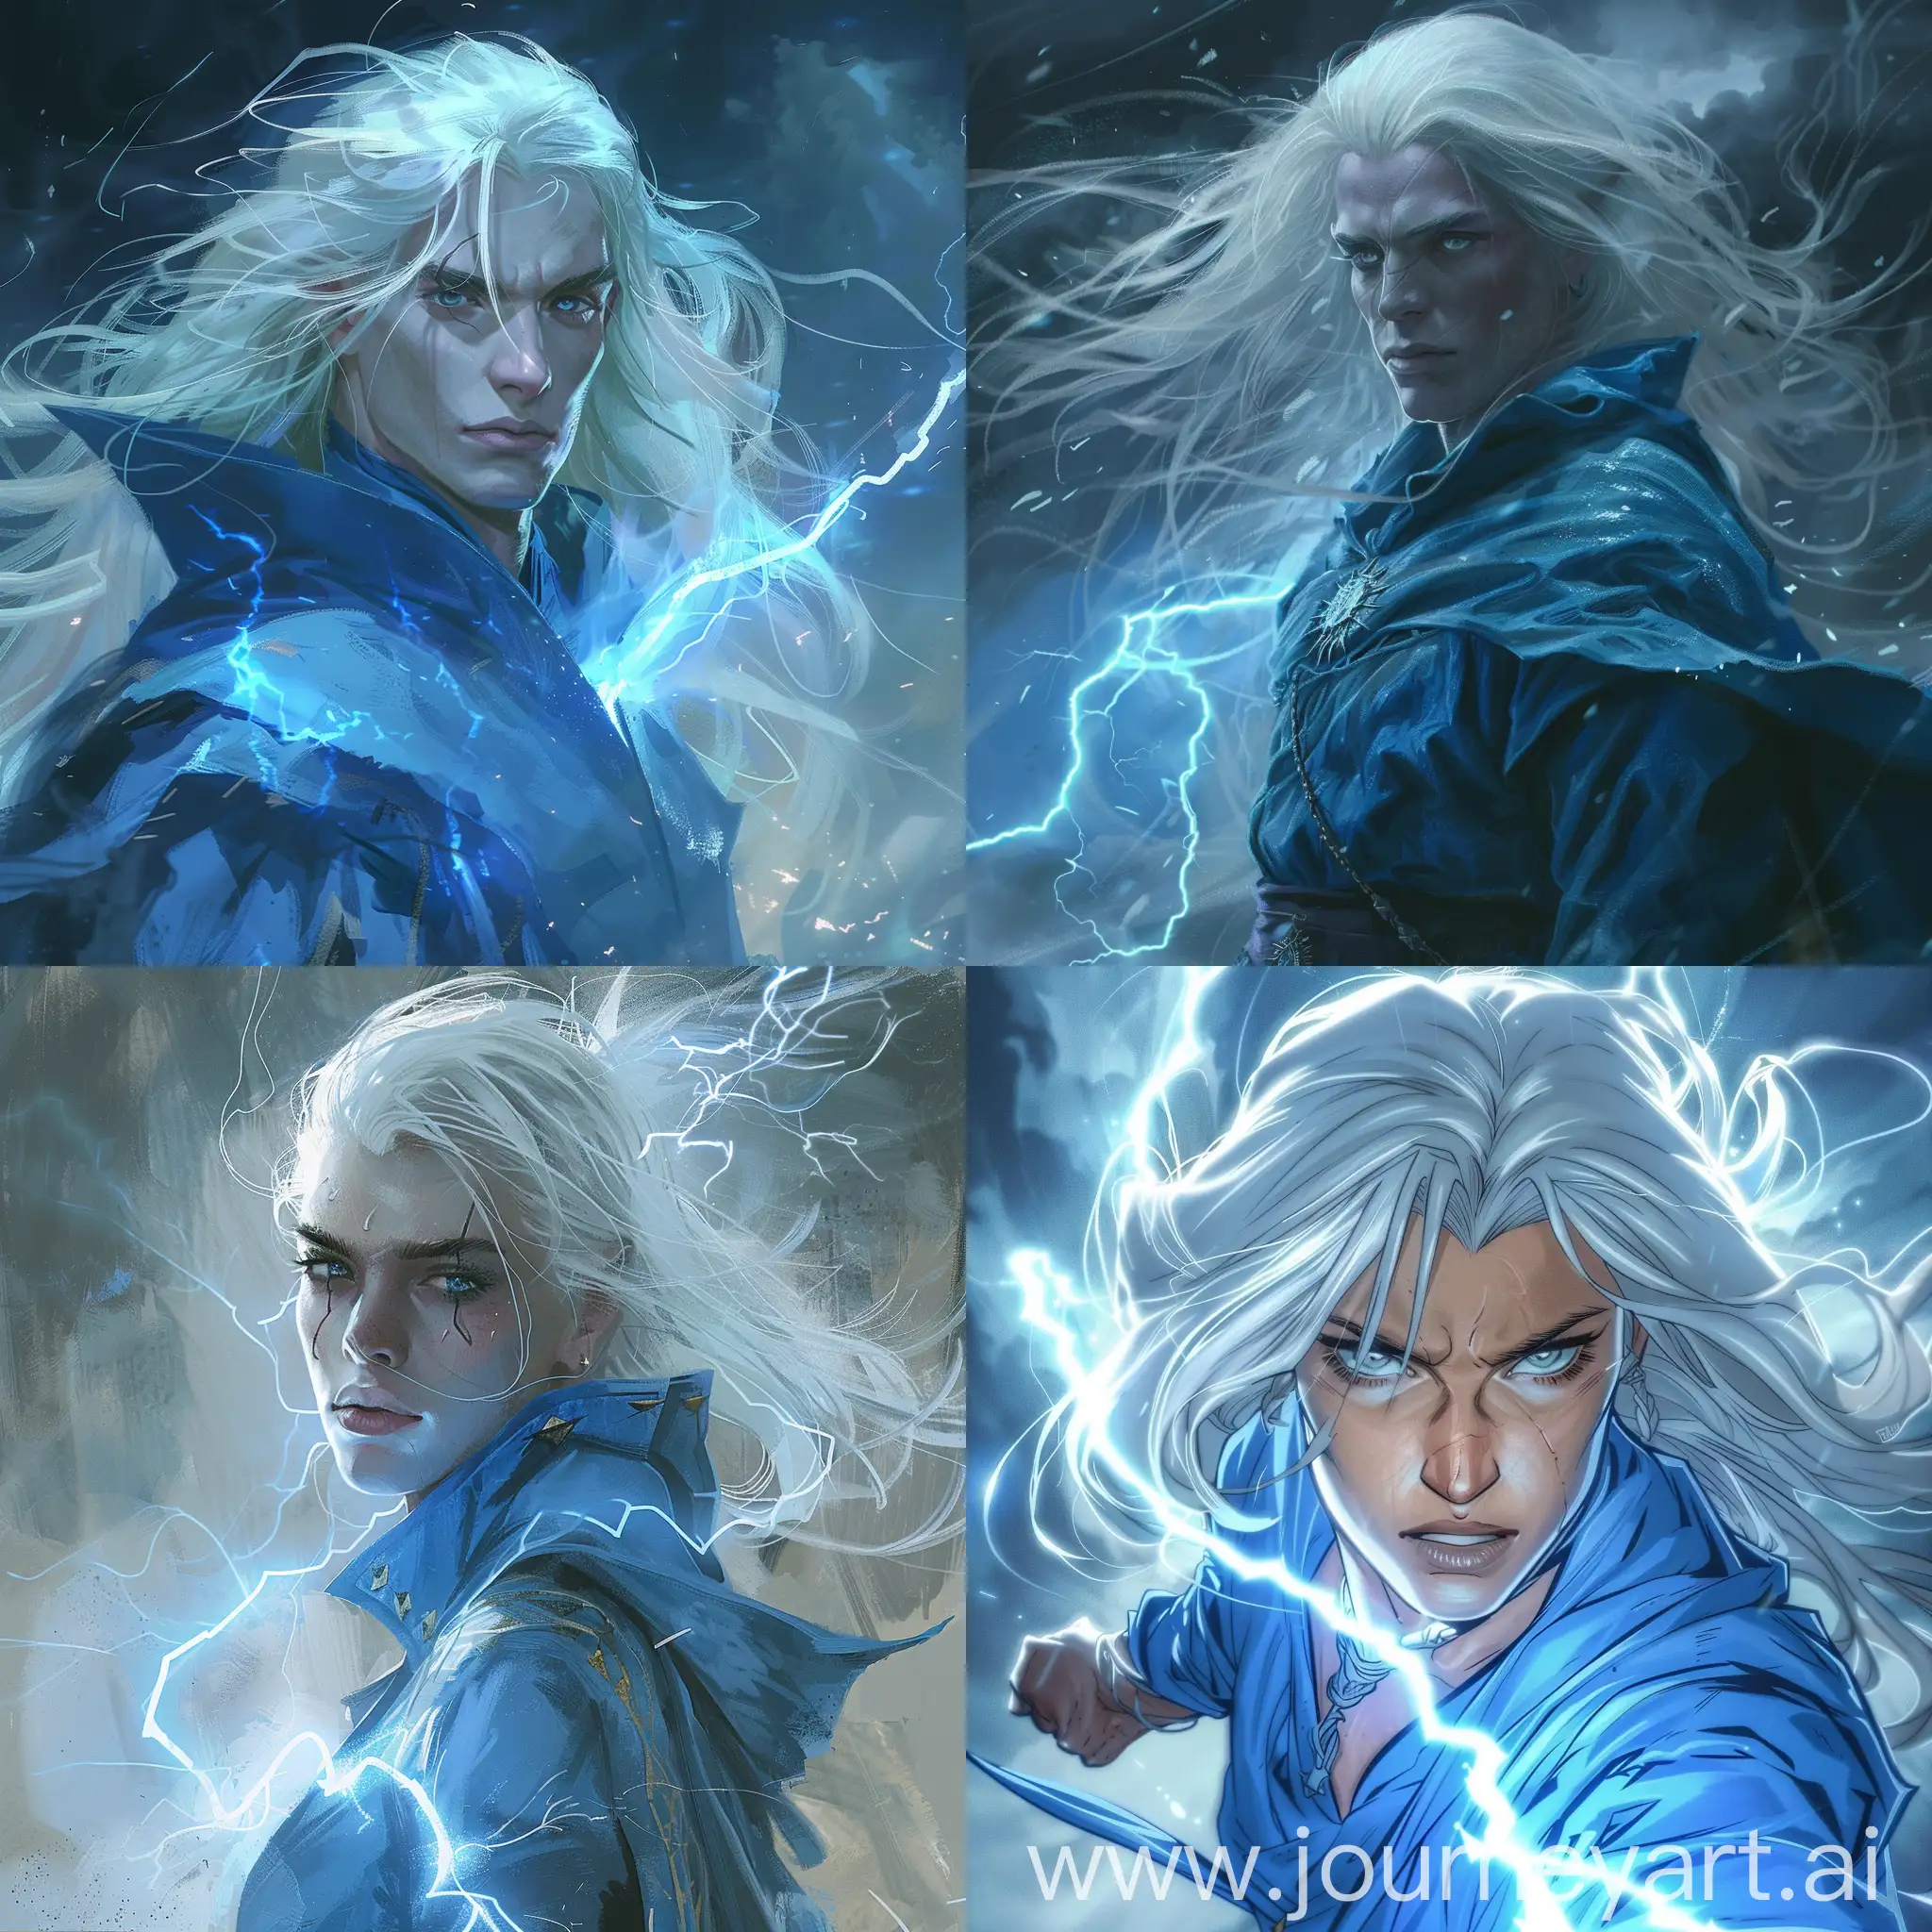 Mystical-WhiteHaired-Lightning-Mage-in-Blue-Robe